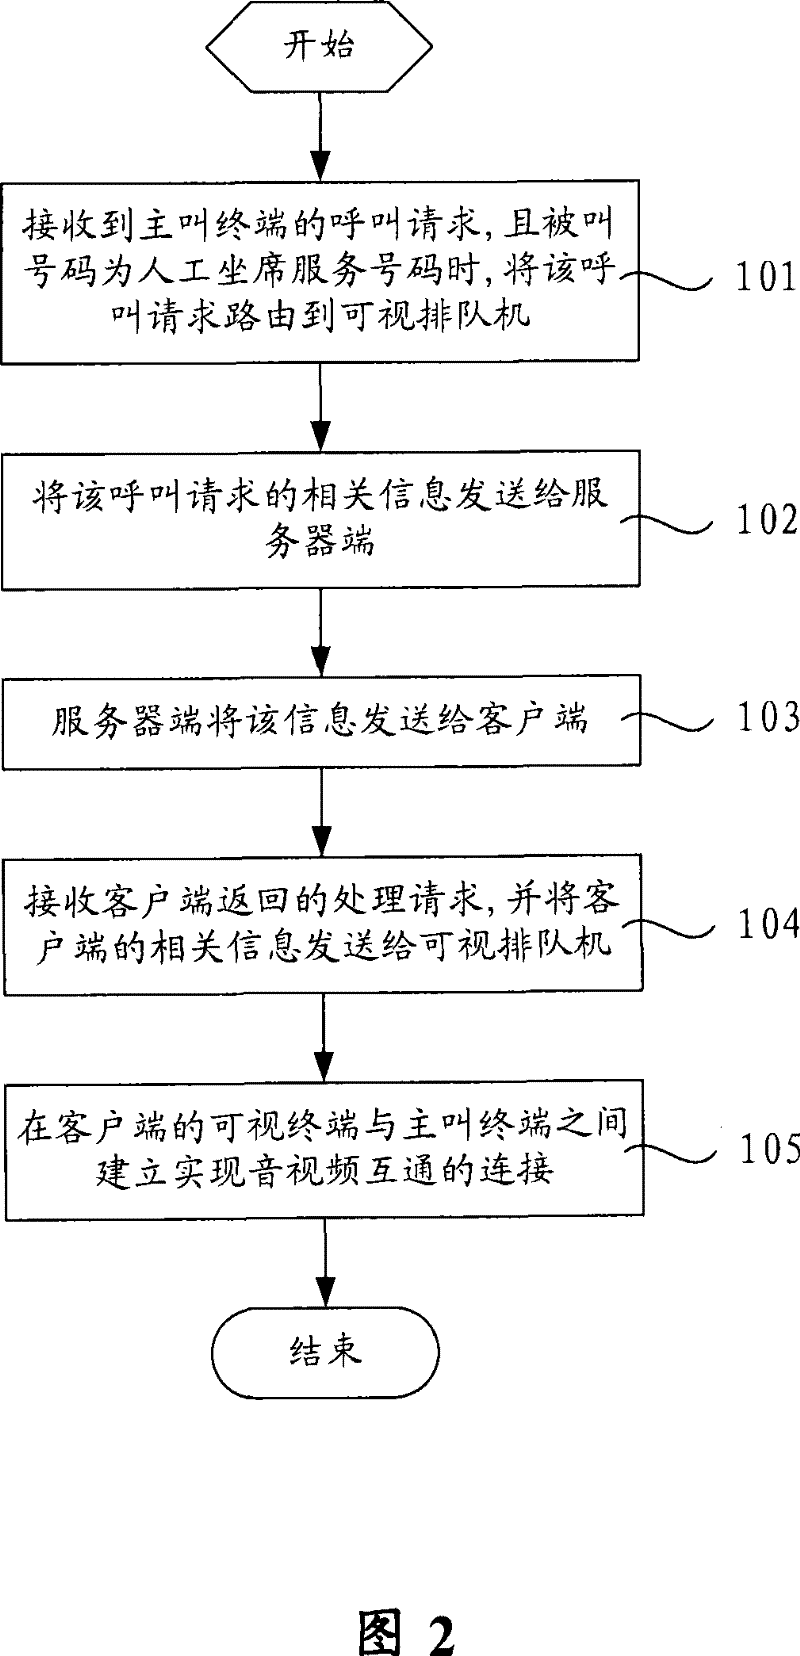 Manual call processing method and manual dispatching video call system